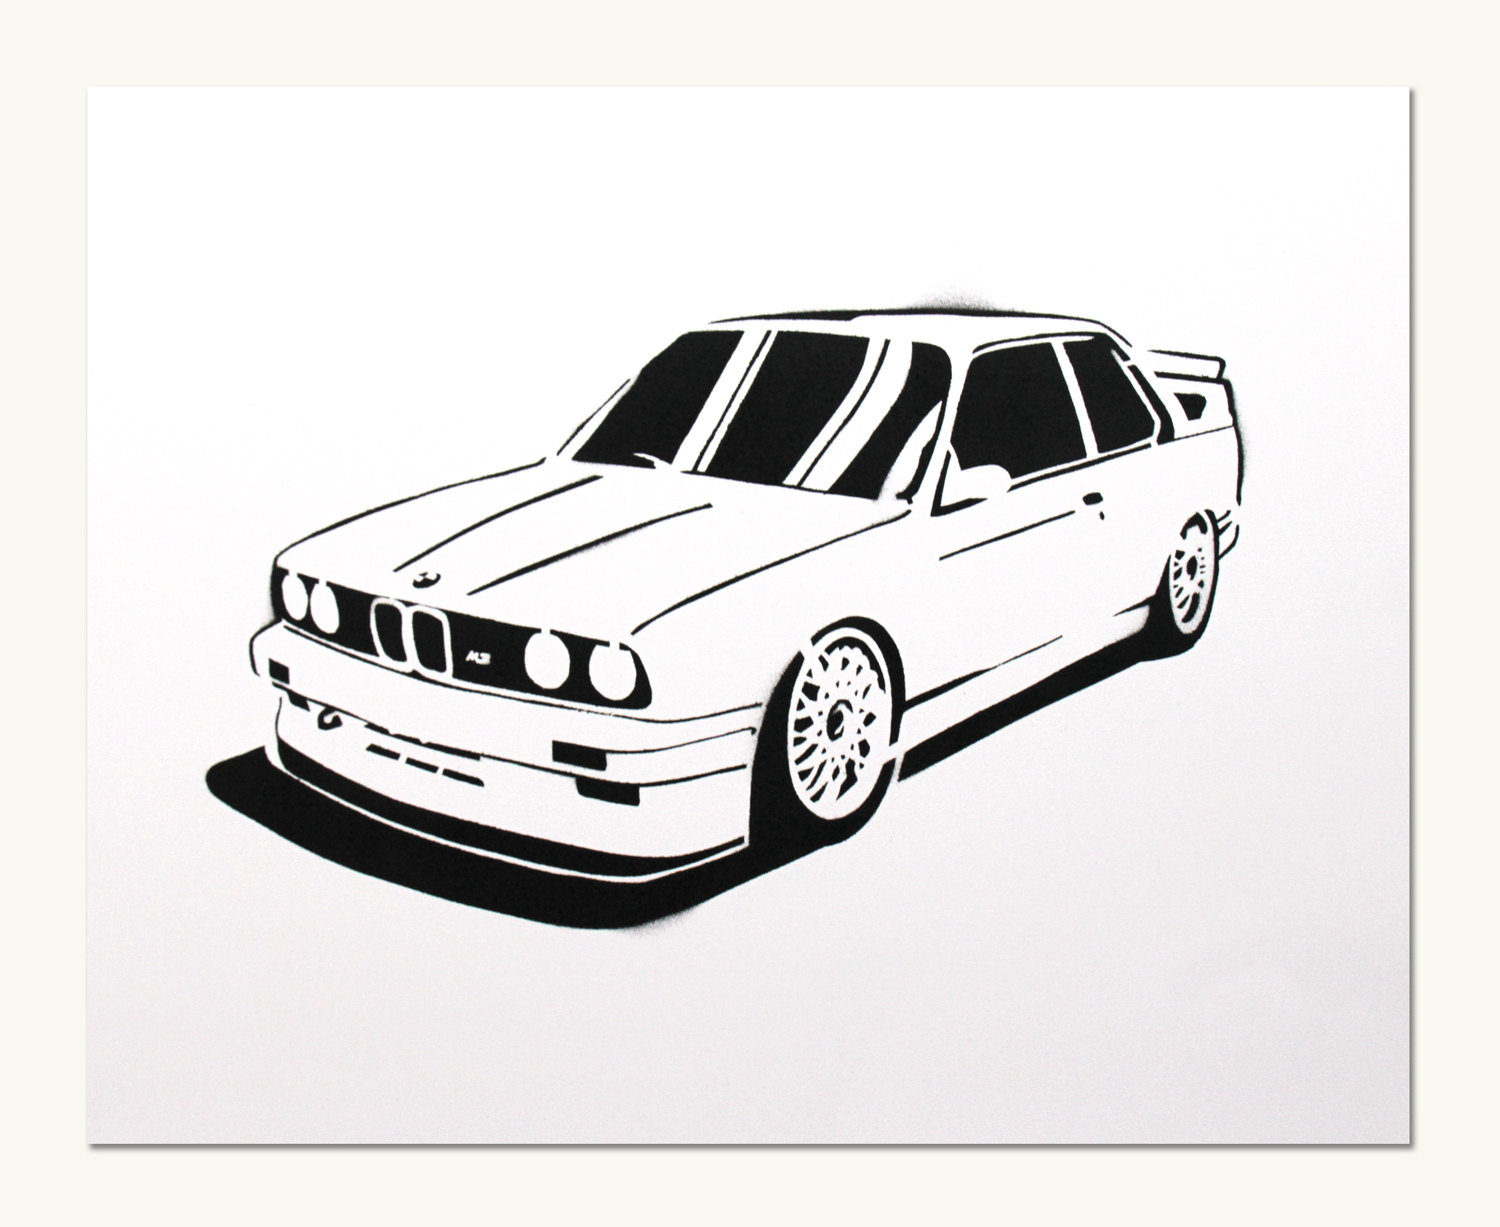 Classic Car Print Bmw E30 M3 By Manualdesigns On Etsy